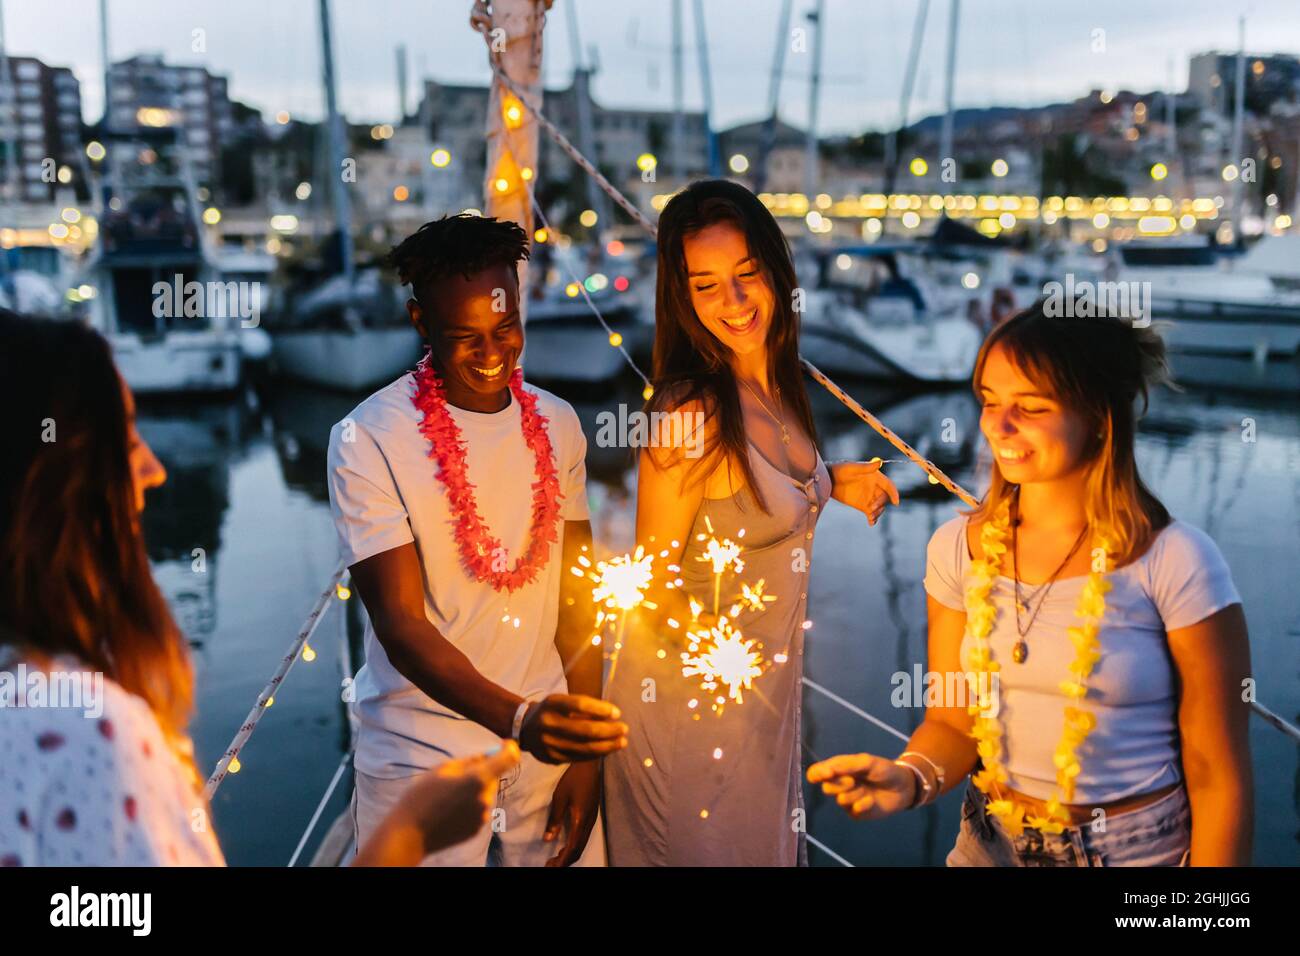 Happy people celebrate together birthday or christmas eve with sparklers on boat Stock Photo